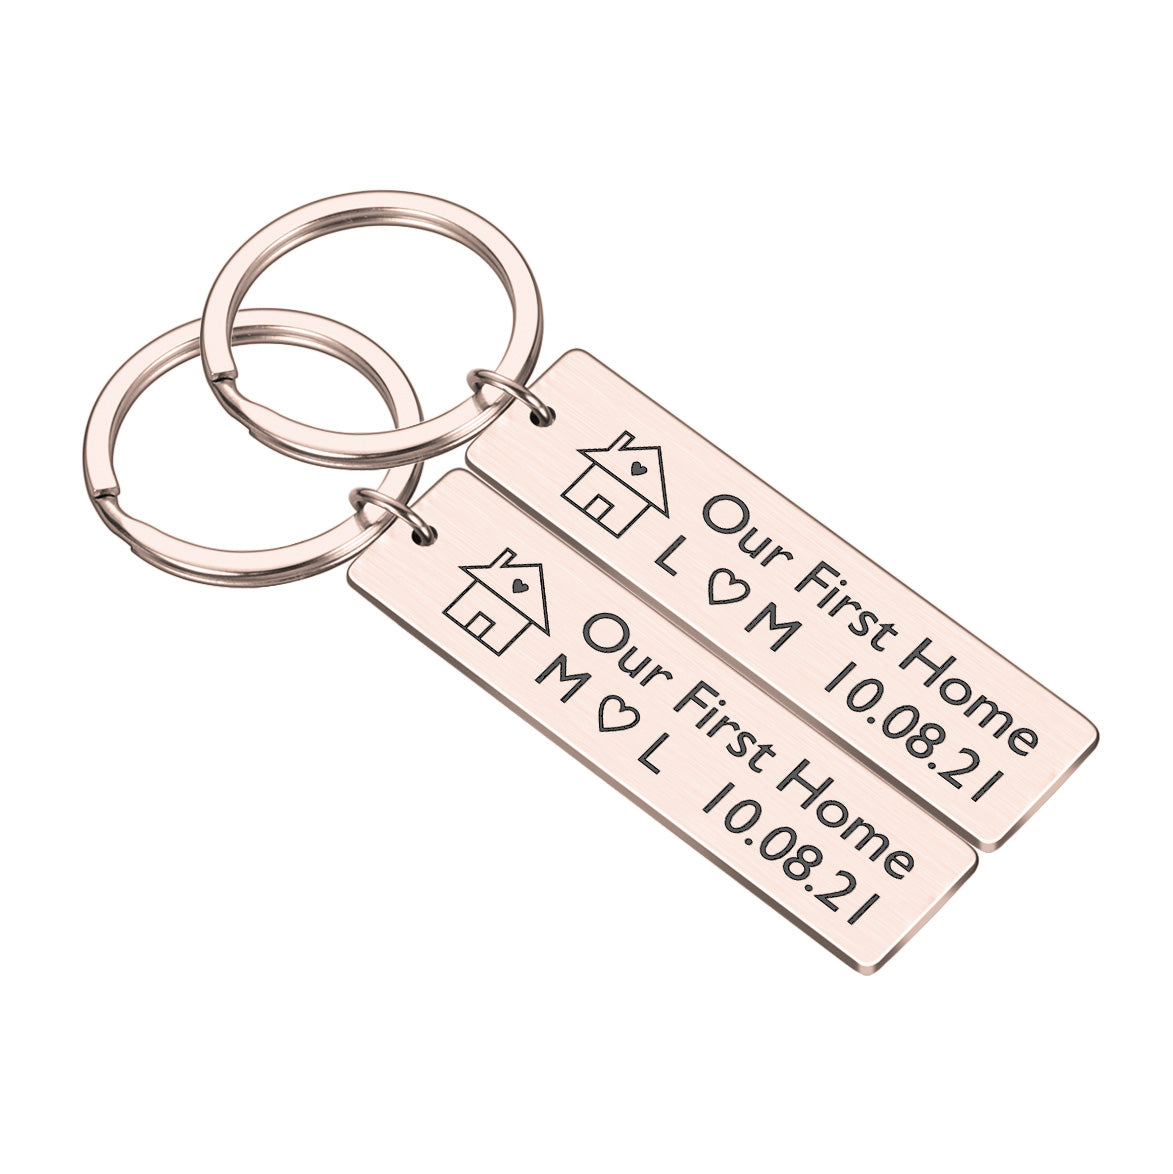 2 x First Home Couple Key ring Set New Home Housewarming Gift